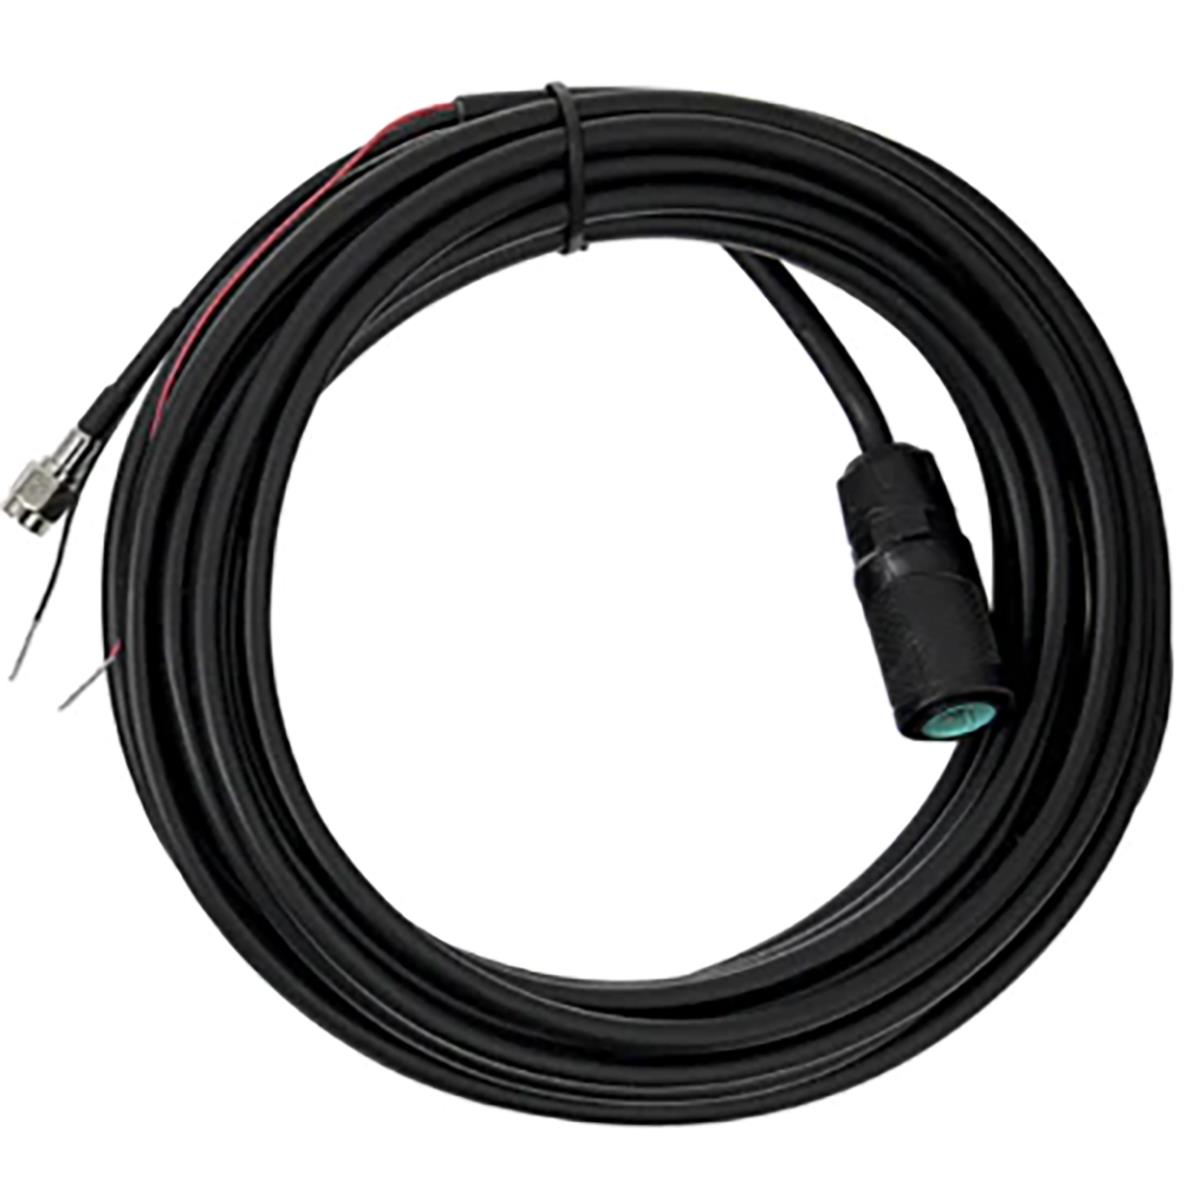 Image of SiOnyx Analog Video Power Cable for Nightwave Camera 3.28'